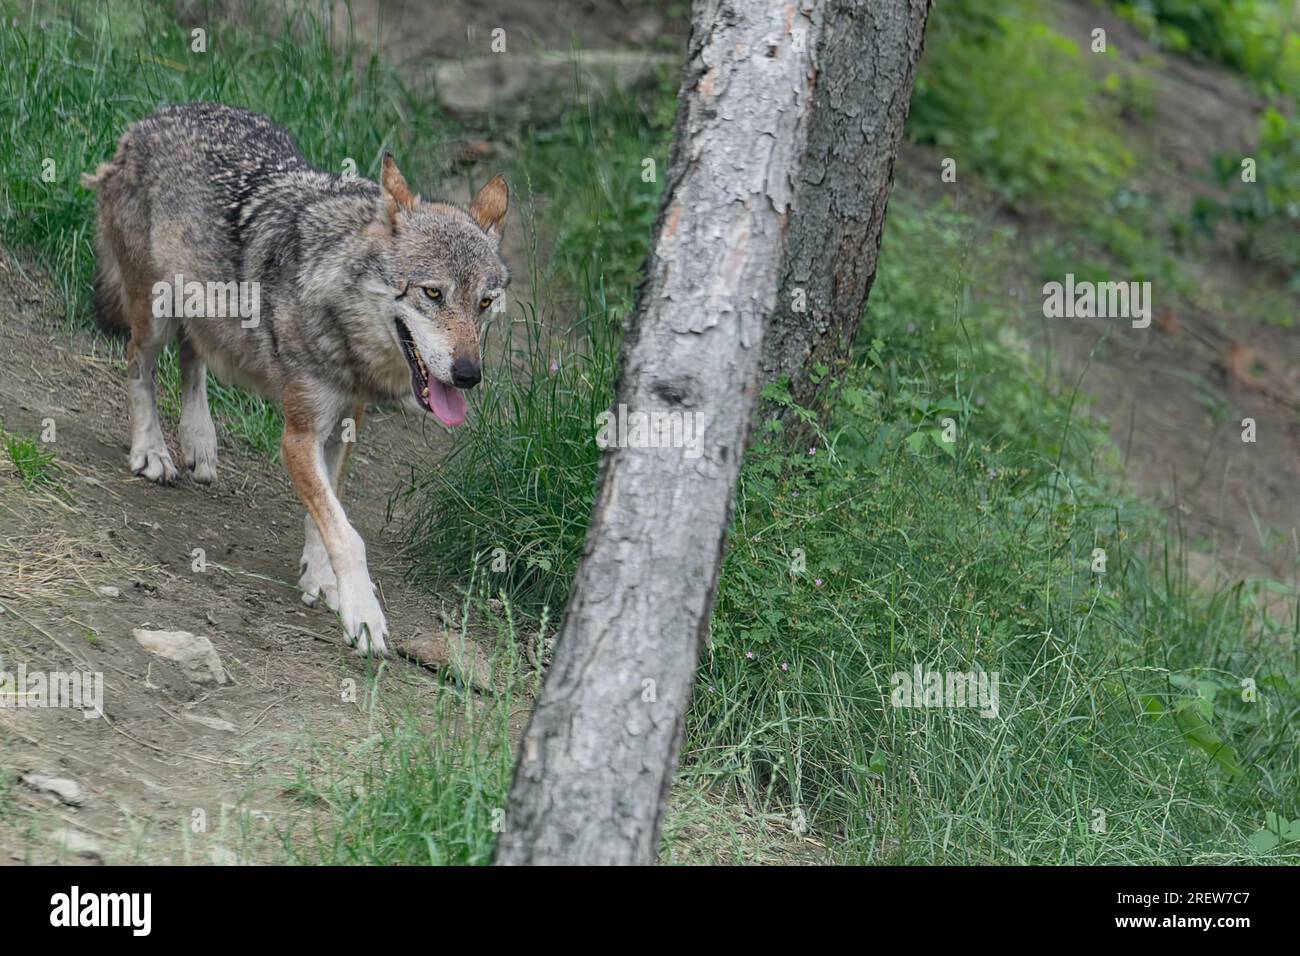 The Italian wolf in the wild forest (Canis lupus italicus) Stock Photo